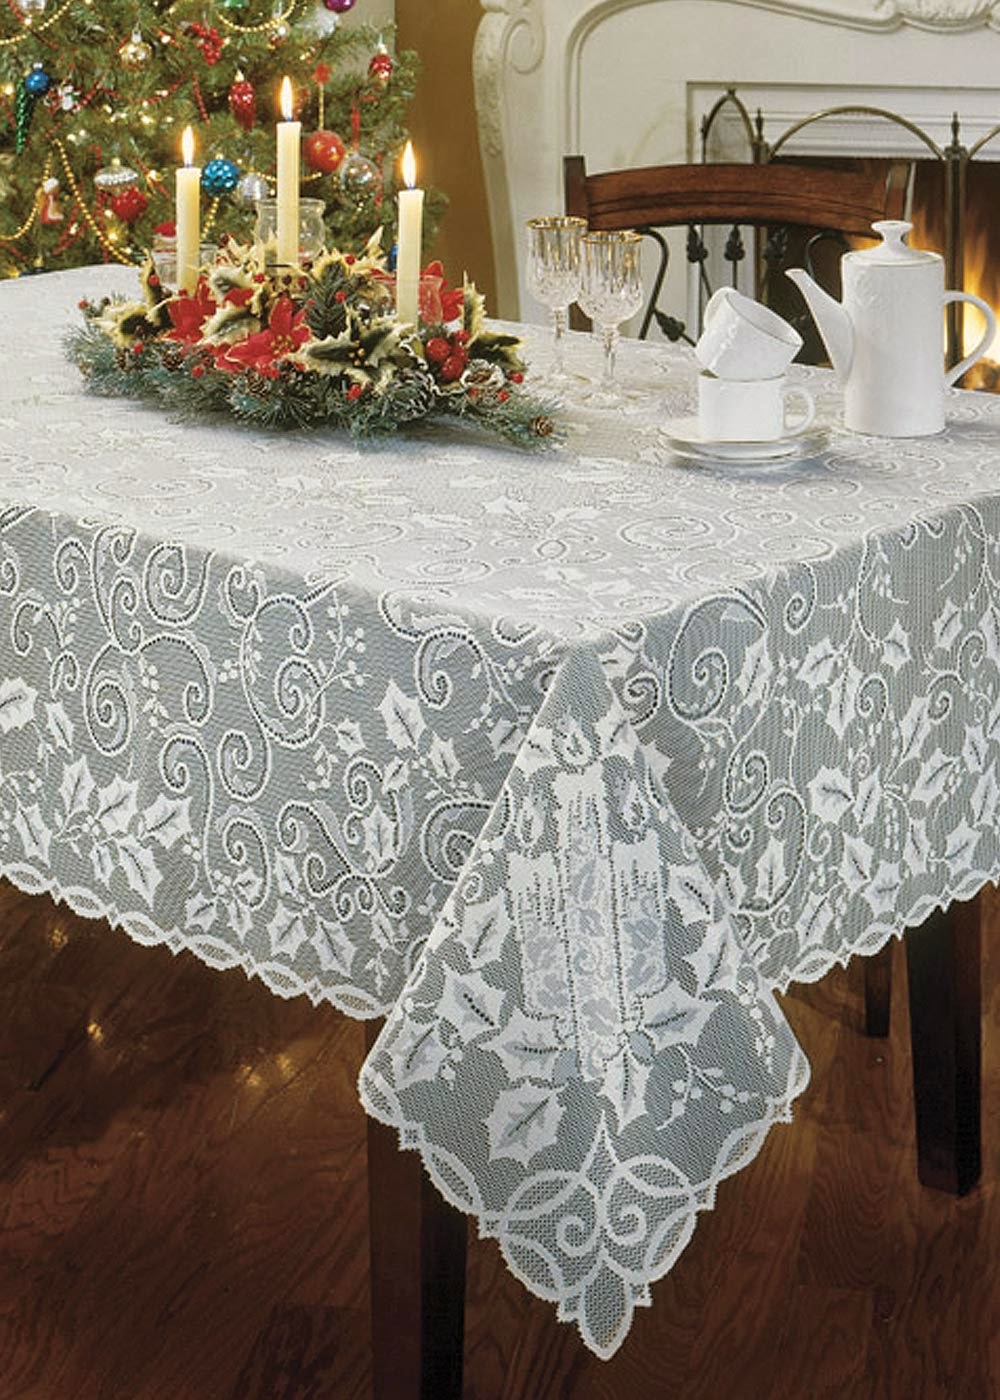 http://www.ebay.com/itm/Tablecloth-Christmas-Holly-Glow-60-Square-Ivory-Sheer-Heritage-Lace-NWOT-/151245410371